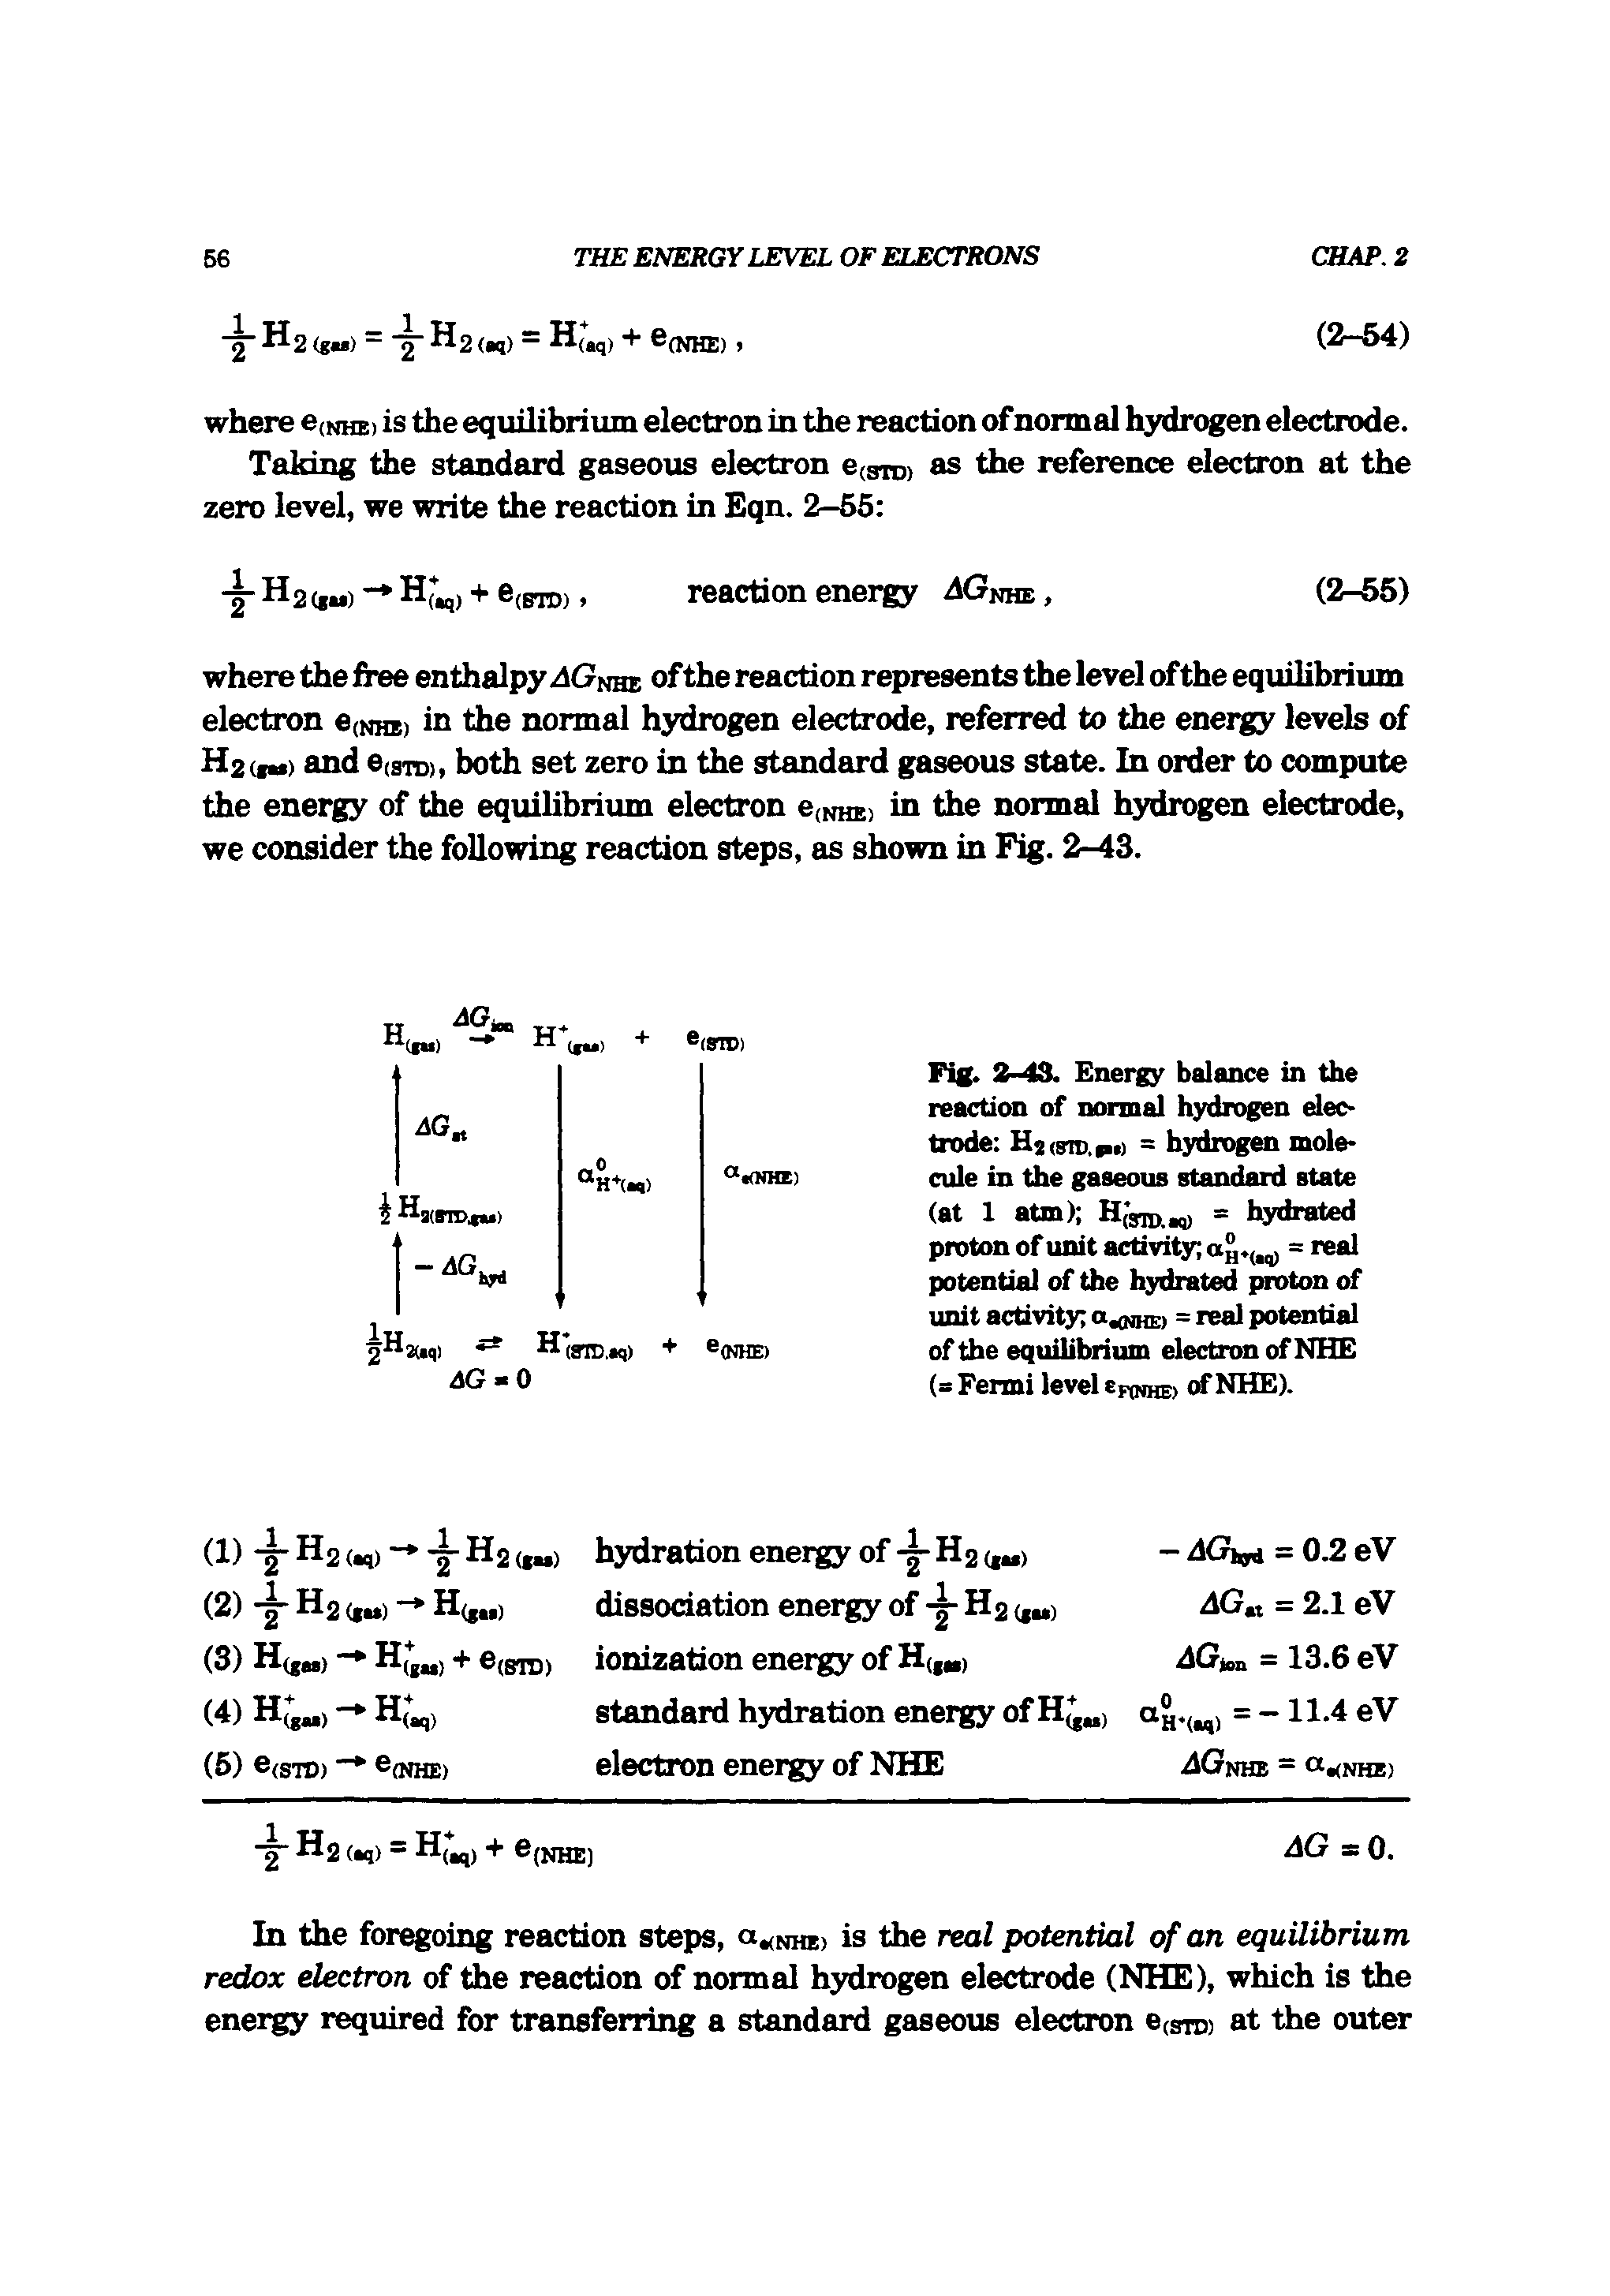 Fig. 2-43. Energy balance in the reaction of normal hydrogen electrode H2(sid.p>j = hydrogen molecule in the gaseous standard state (at 1 atm) H( gro. i) = hydrated proton of unit activity = real potential of the hydrated proton of unit activity a.ajHE) = real potential of the equilibrium electron of NHE (= Fermi level cpcnhe) of NHE).